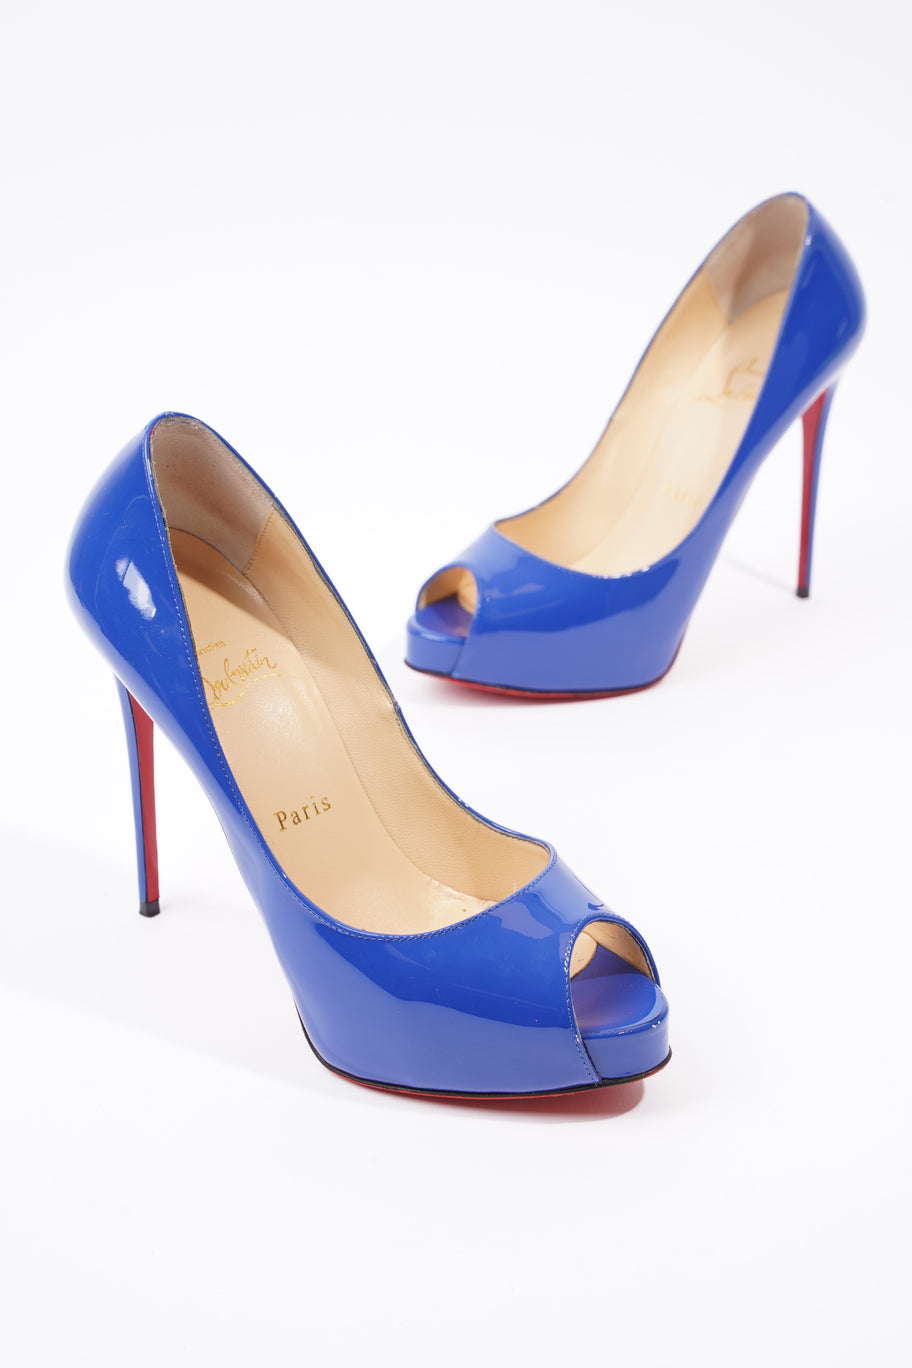 New Very Prive Heels 120 Blue Patent Leather EU 37.5 UK 4.5 Image 9